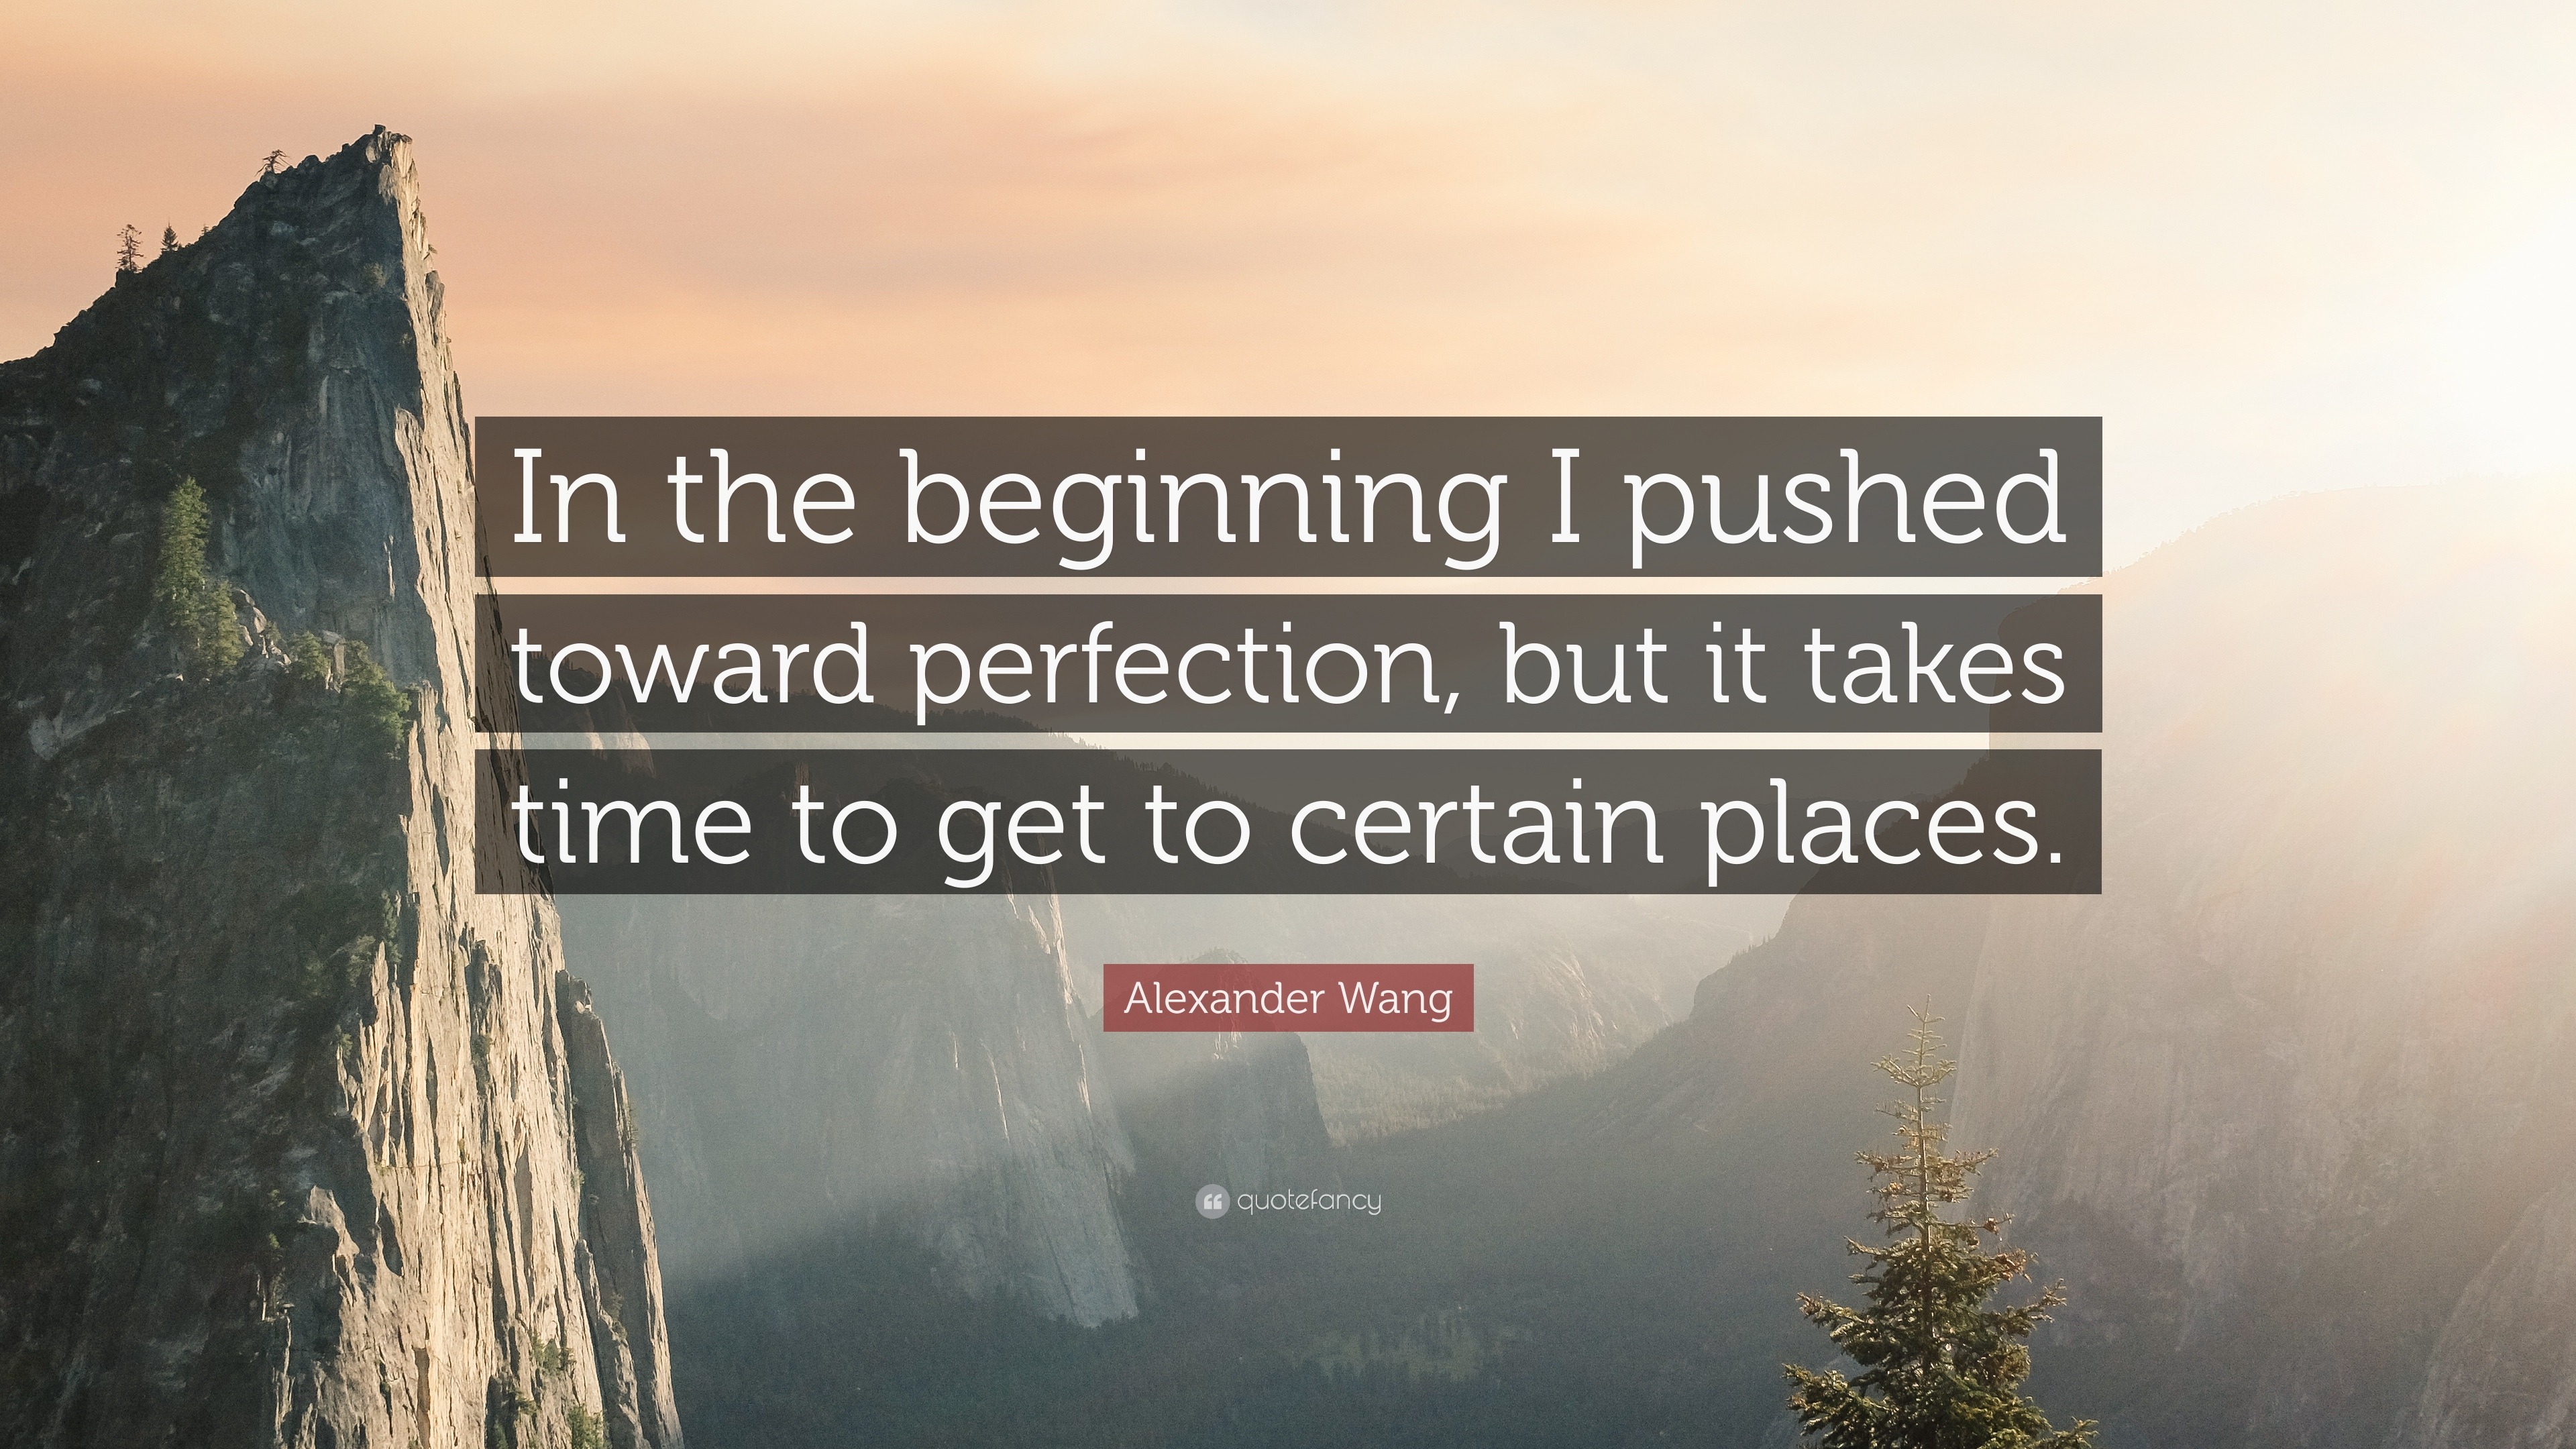 Alexander Wang Quote: “In the beginning I pushed toward perfection, but ...